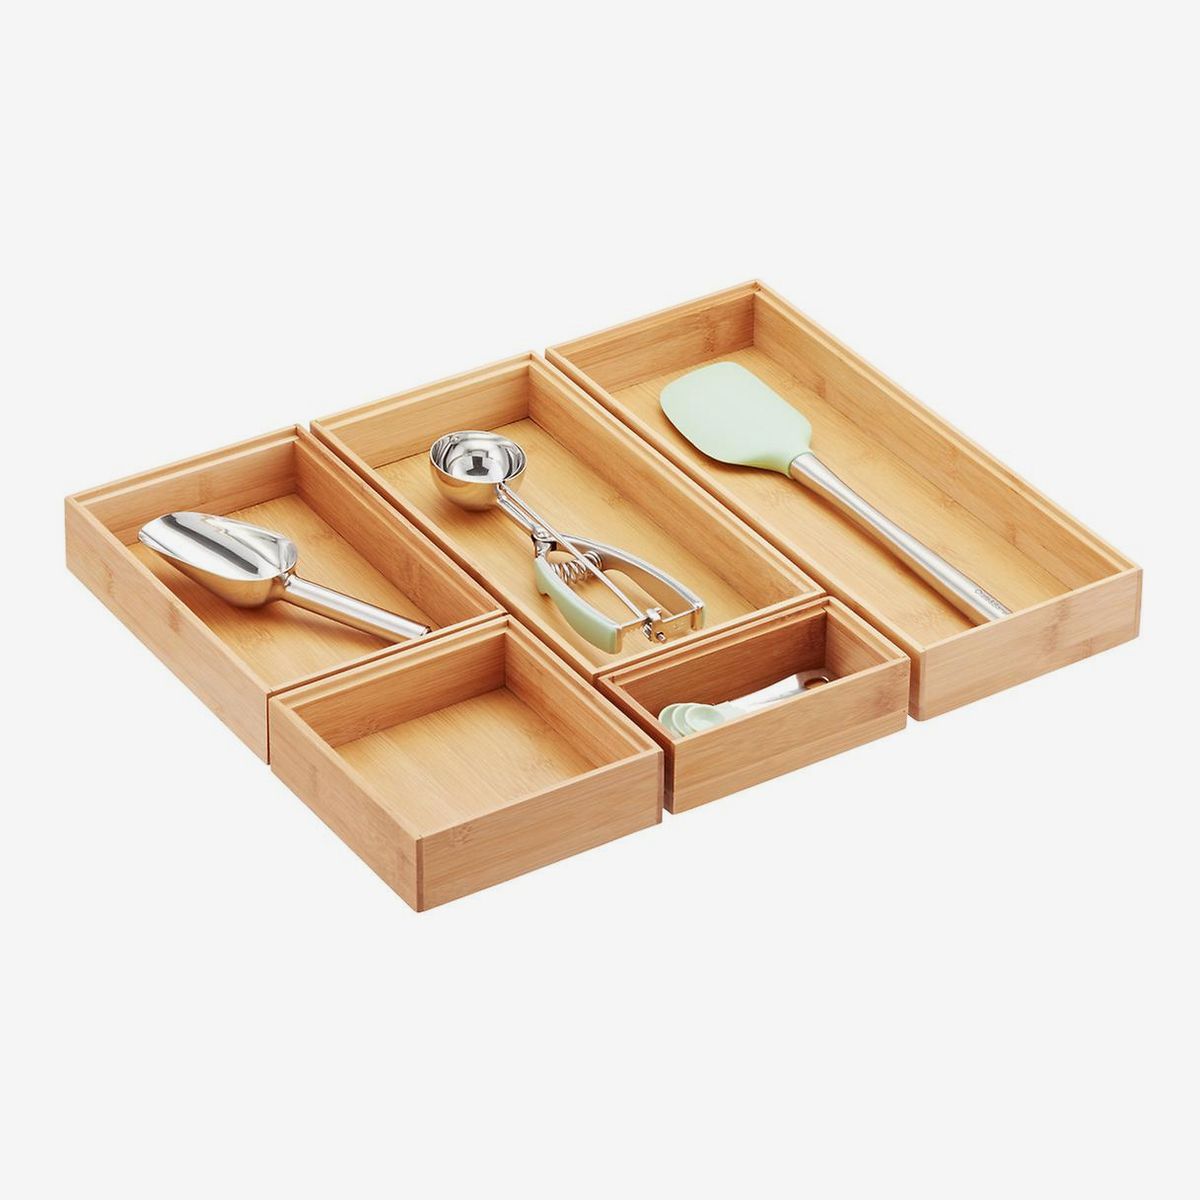 Simply Bamboo 6 Compartment Bamboo Organizer Tray 